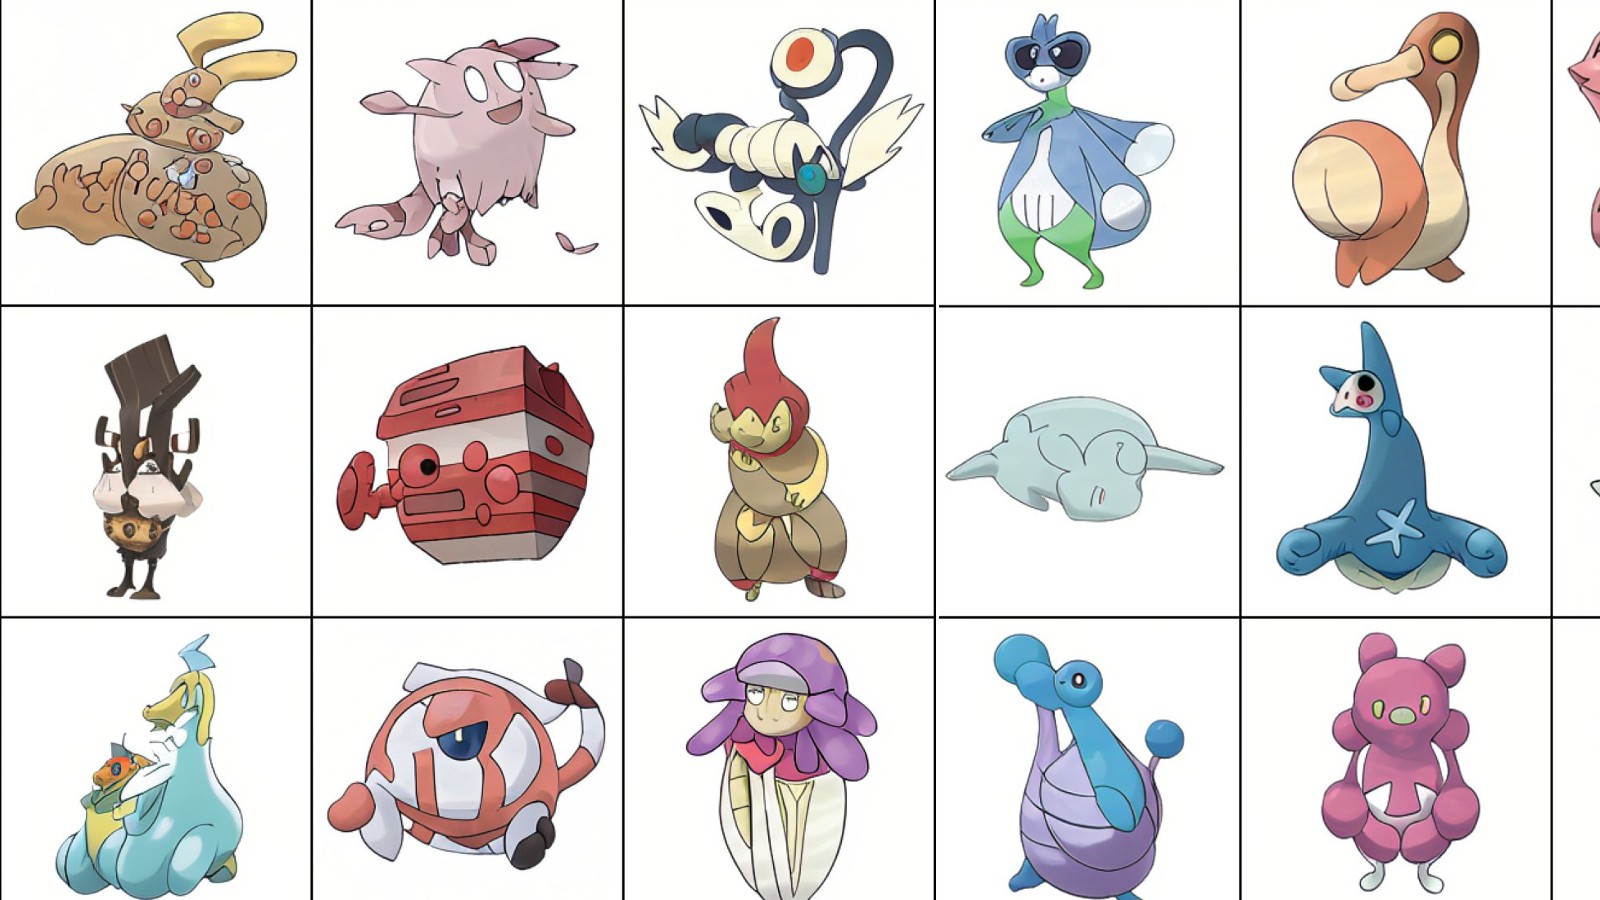 All of these Pokémon were made by an Artificial Intelligence